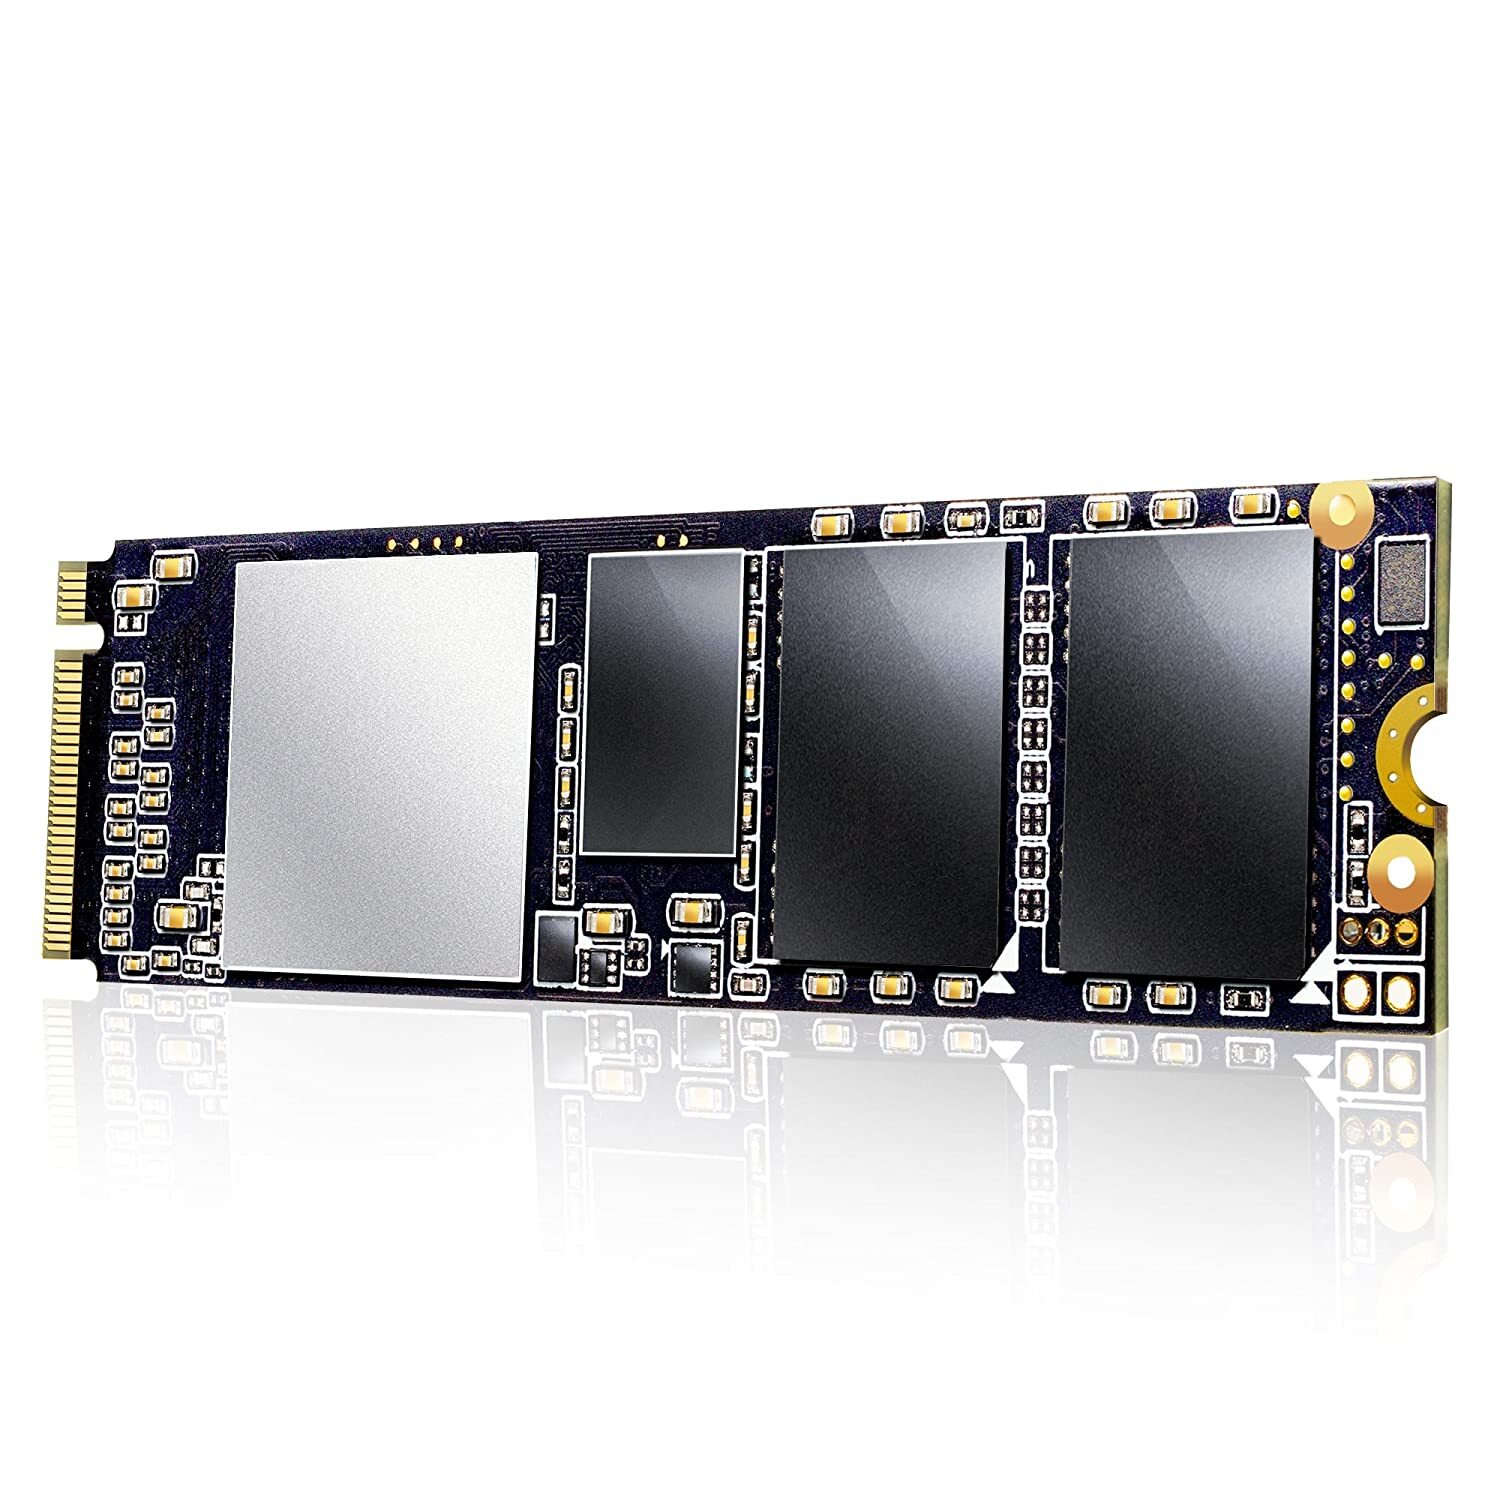 XPG SX6000 PCIe 1TB 3D NAND PCIe Gen3x2 M.2 2280 NVMe 1.2 R/W up to 1000/800MB/s Solid State Drive (ASX6000NP-1TT-C)